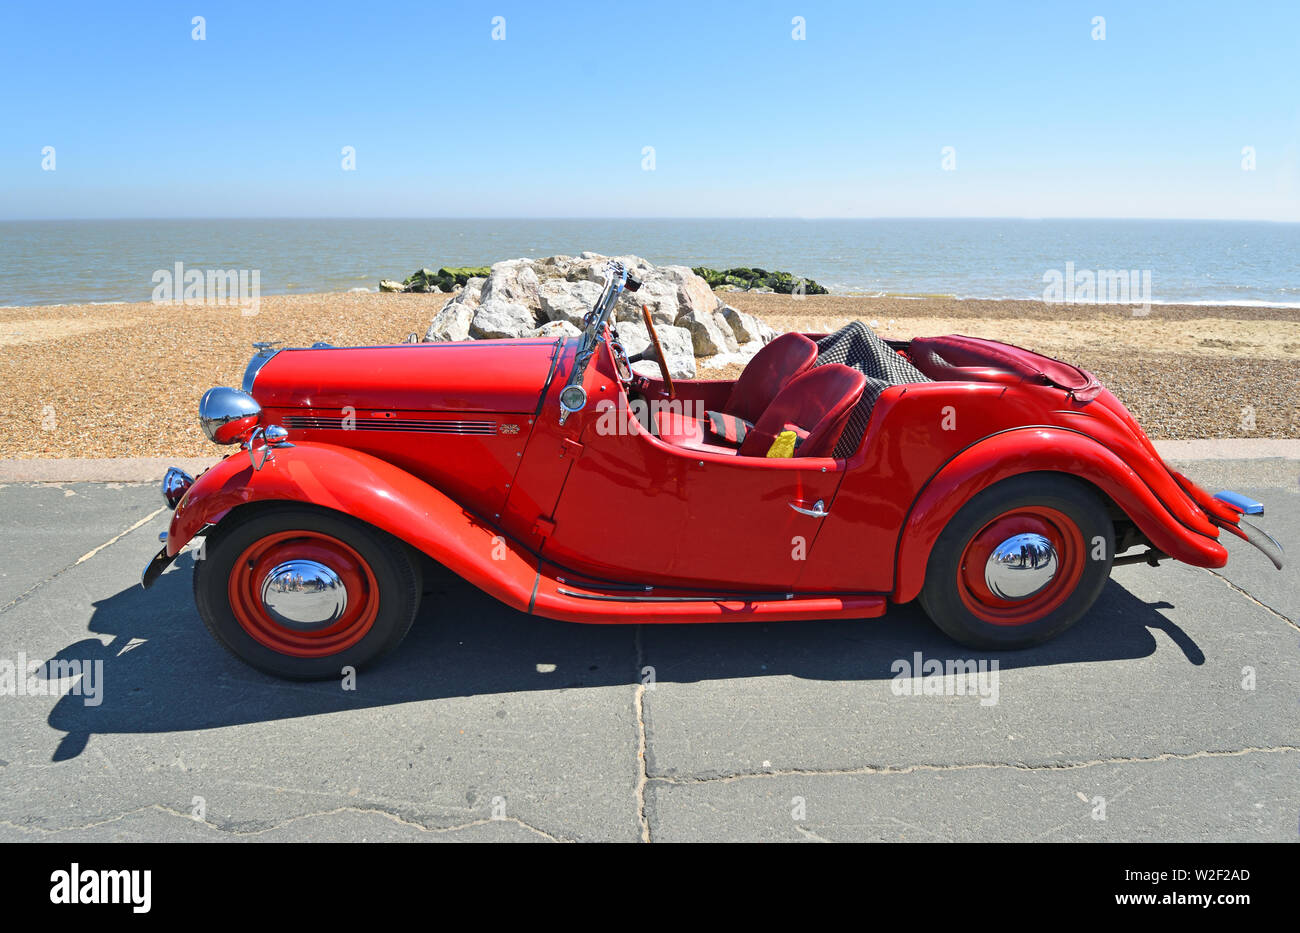 Classic Red Singer Motor Car Parked on Seafront Promenade. Stock Photo